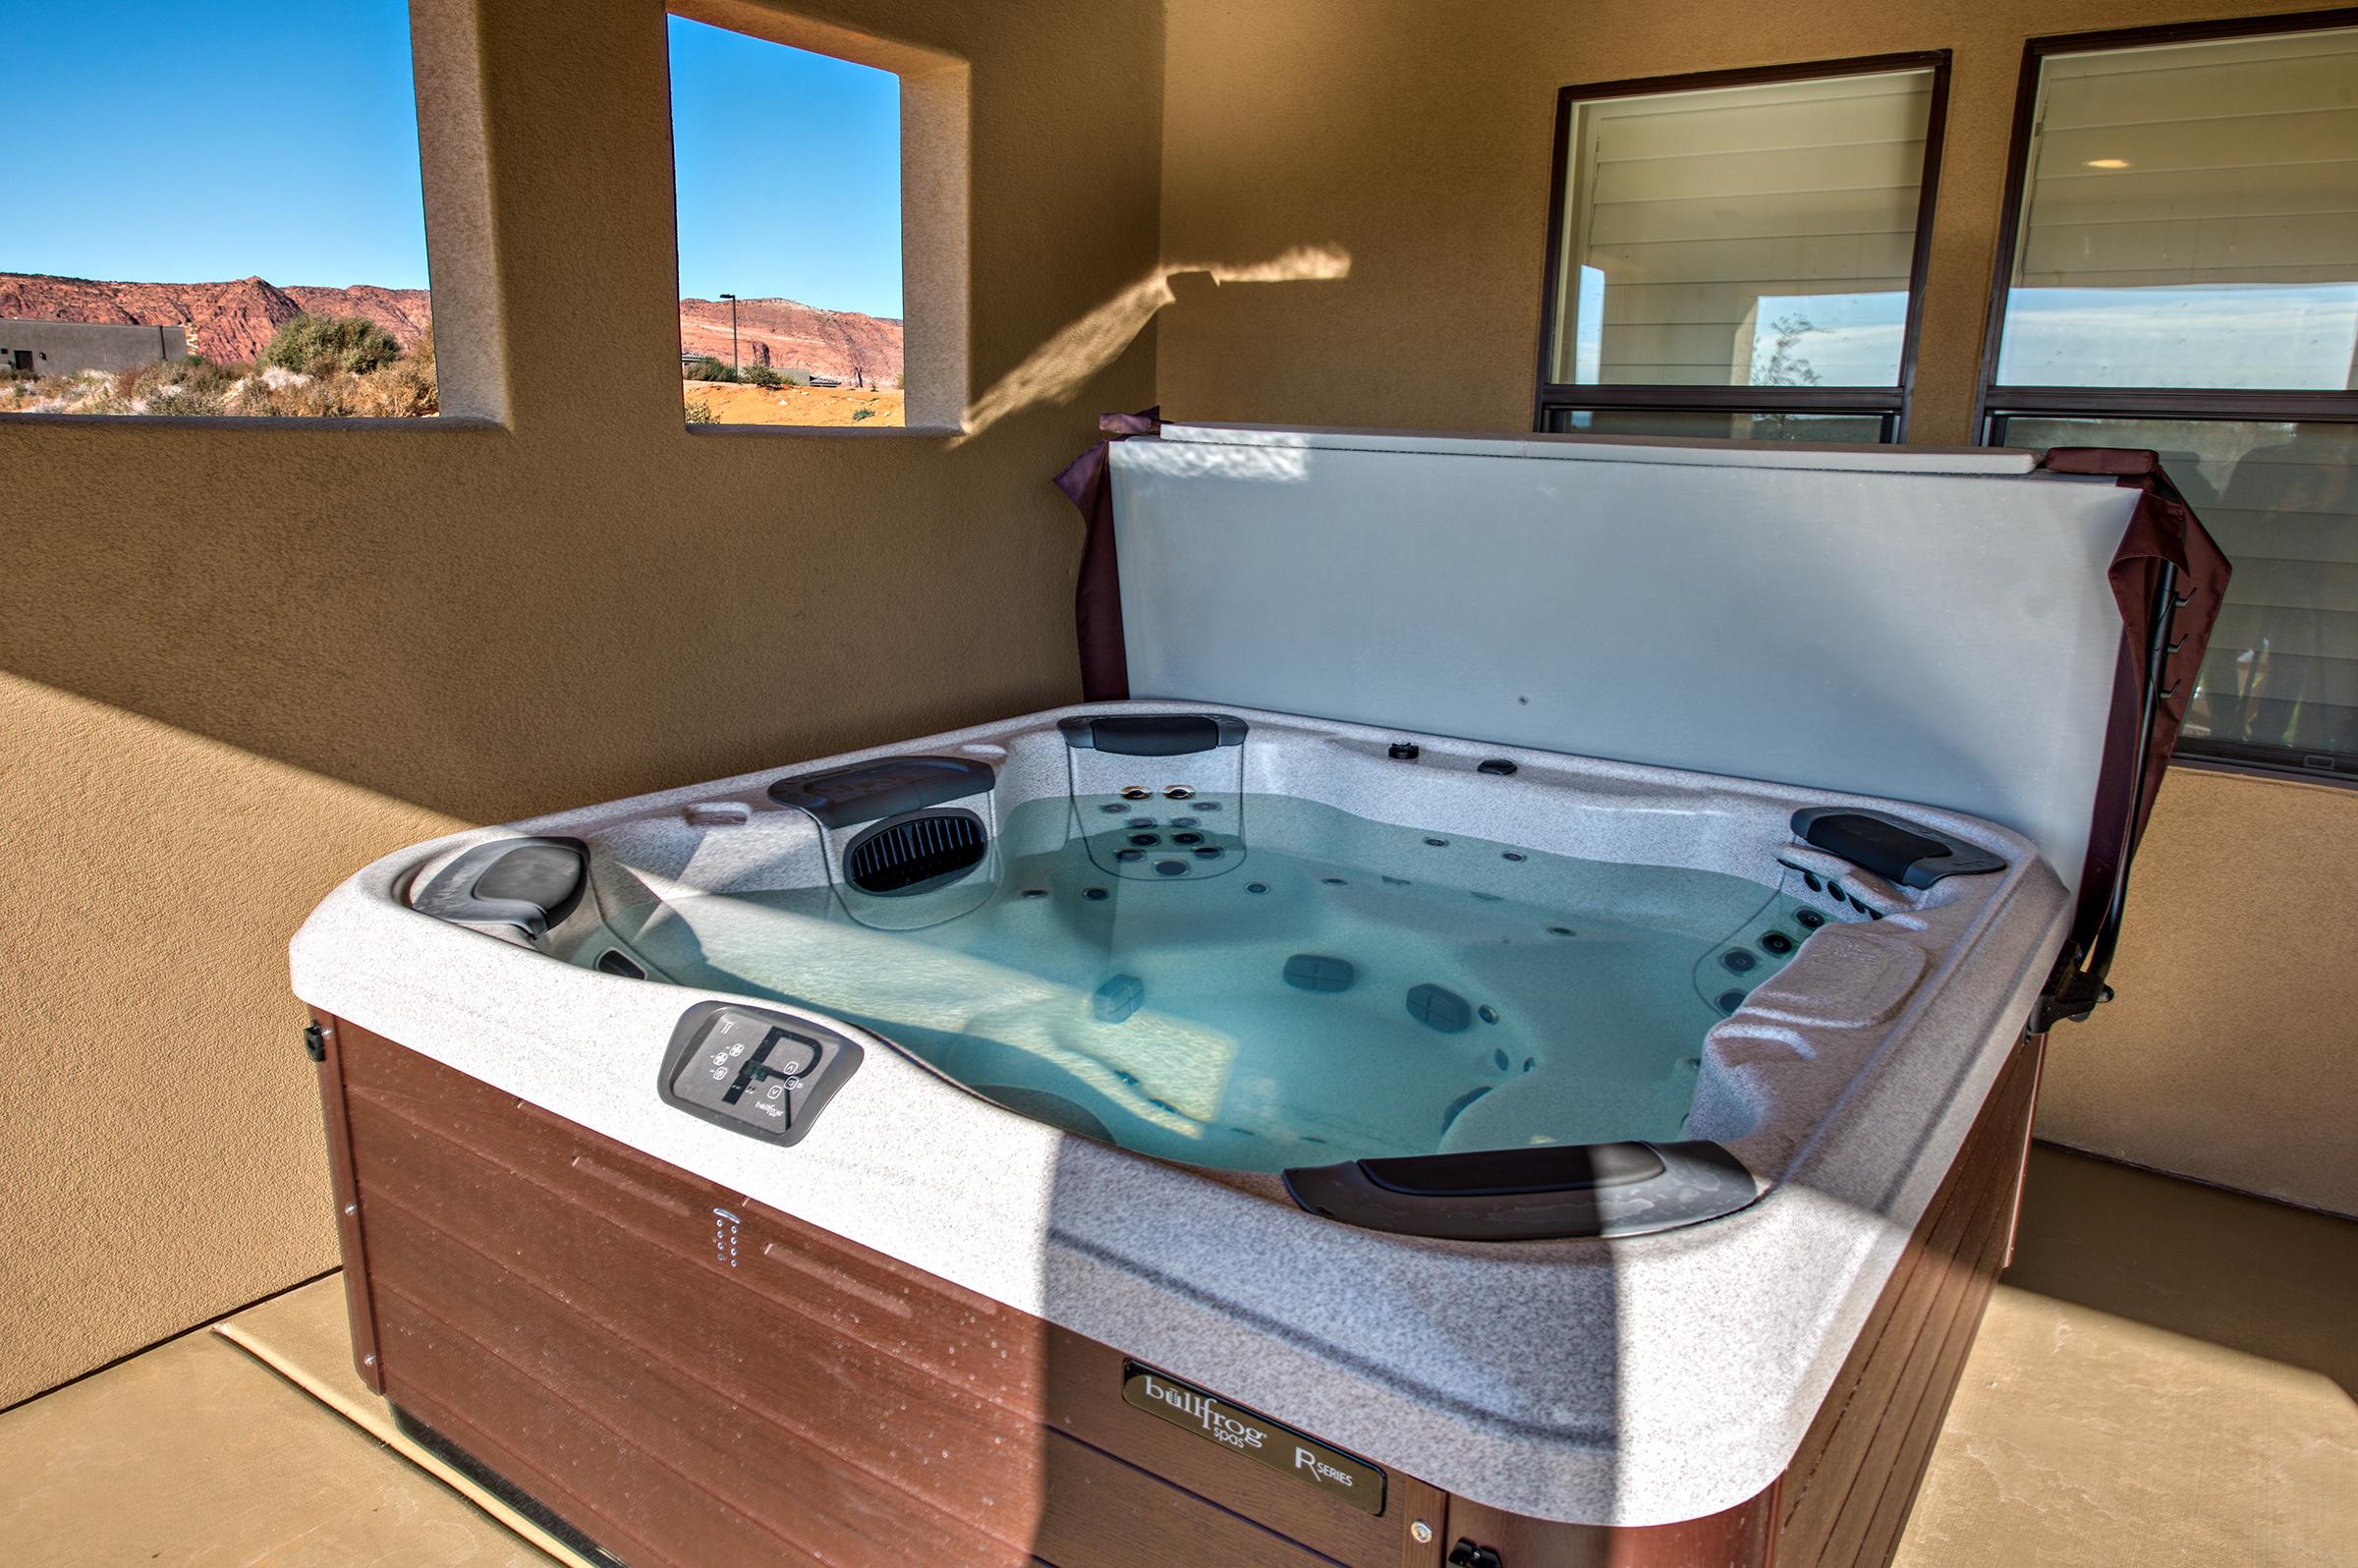 Sit in this spacious hot tub and soak your worries away!